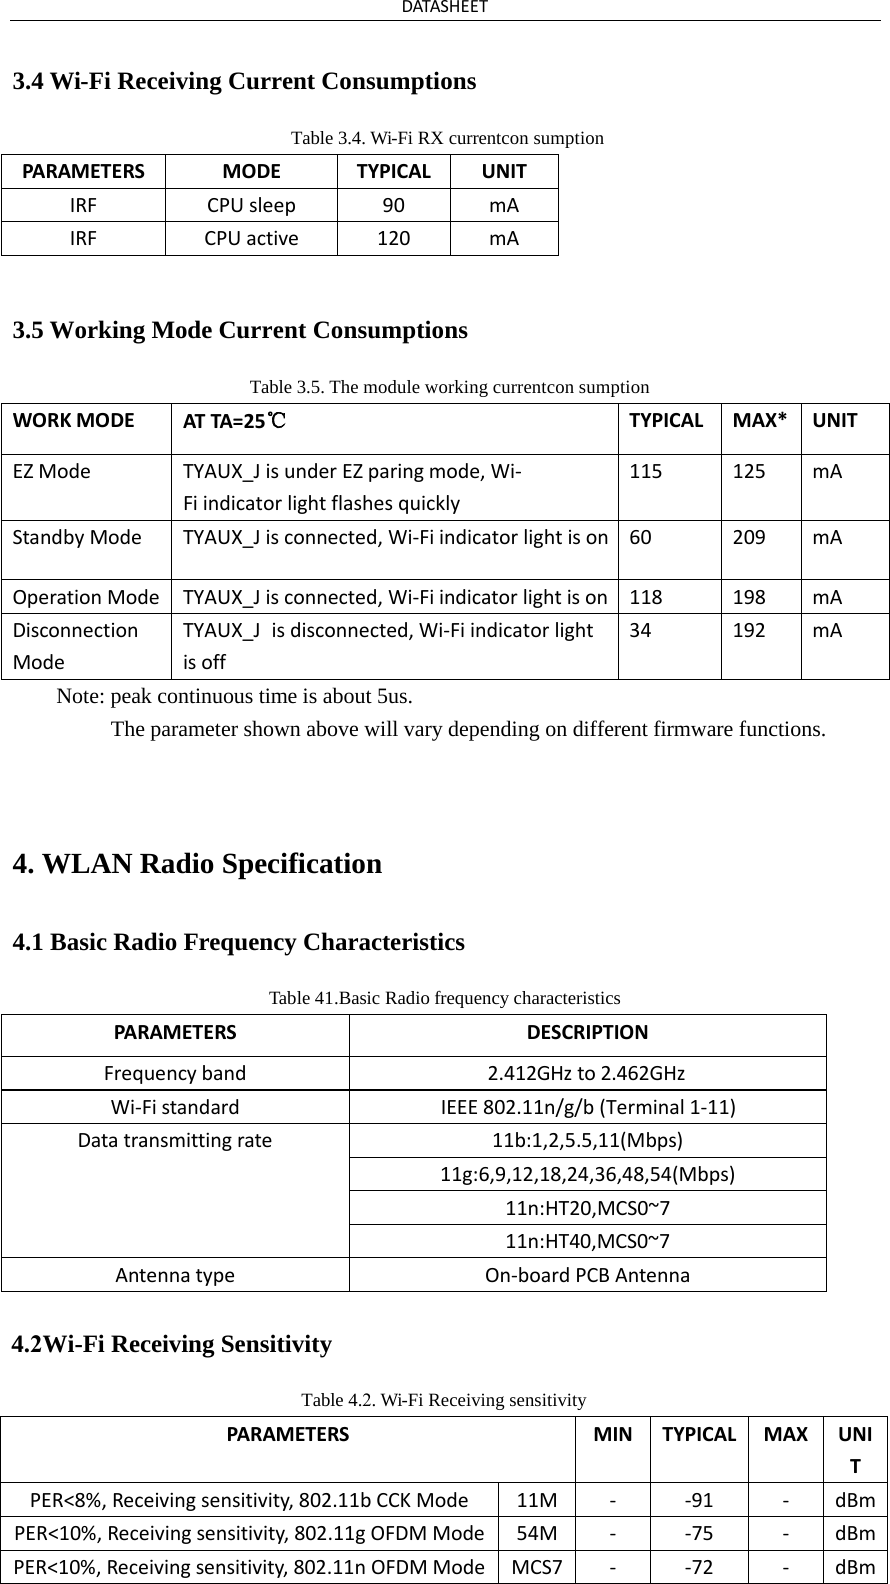 DATASHEET 3.4 Wi-Fi Receiving Current Consumptions Table 3.4. Wi-Fi RX currentcon sumption PARAMETERS MODE TYPICAL UNIT IRF CPU sleep 90 mA IRF CPU active 120 mA 3.5 Working Mode Current Consumptions Table 3.5. The module working currentcon sumption WORK MODE AT TA=25℃ TYPICAL MAX* UNIT EZ Mode TYAUX_J is under EZ paring mode, Wi-Fi indicator light flashes quickly 115  125 mA Standby Mode TYAUX_J is connected, Wi-Fi indicator light is on  60 209 mA Operation Mode TYAUX_J is connected, Wi-Fi indicator light is on  118 198 mA Disconnection Mode TYAUX_J is disconnected, Wi-Fi indicator light is off 34  192 mA Note: peak continuous time is about 5us. The parameter shown above will vary depending on different firmware functions. 4. WLAN Radio Specification4.1 Basic Radio Frequency Characteristics Table 41.Basic Radio frequency characteristics PARAMETERS DESCRIPTION Frequency band 2.412GHz to 2.462GHz Wi-Fi standard IEEE 802.11n/g/b (Terminal 1-11) Data transmitting rate 11b:1,2,5.5,11(Mbps) 11g:6,9,12,18,24,36,48,54(Mbps) 11n:HT20,MCS0~7 11n:HT40,MCS0~7 Antenna type On-board PCB Antenna 4.2Wi-Fi Receiving Sensitivity Table 4.2. Wi-Fi Receiving sensitivity PARAMETERS MIN TYPICAL MAX UNIT PER&lt;8%, Receiving sensitivity, 802.11b CCK Mode 11M  -  -91  -  dBm PER&lt;10%, Receiving sensitivity, 802.11g OFDM Mode 54M  -  -75  -  dBm PER&lt;10%, Receiving sensitivity, 802.11n OFDM Mode MCS7  -  -72  -  dBm 